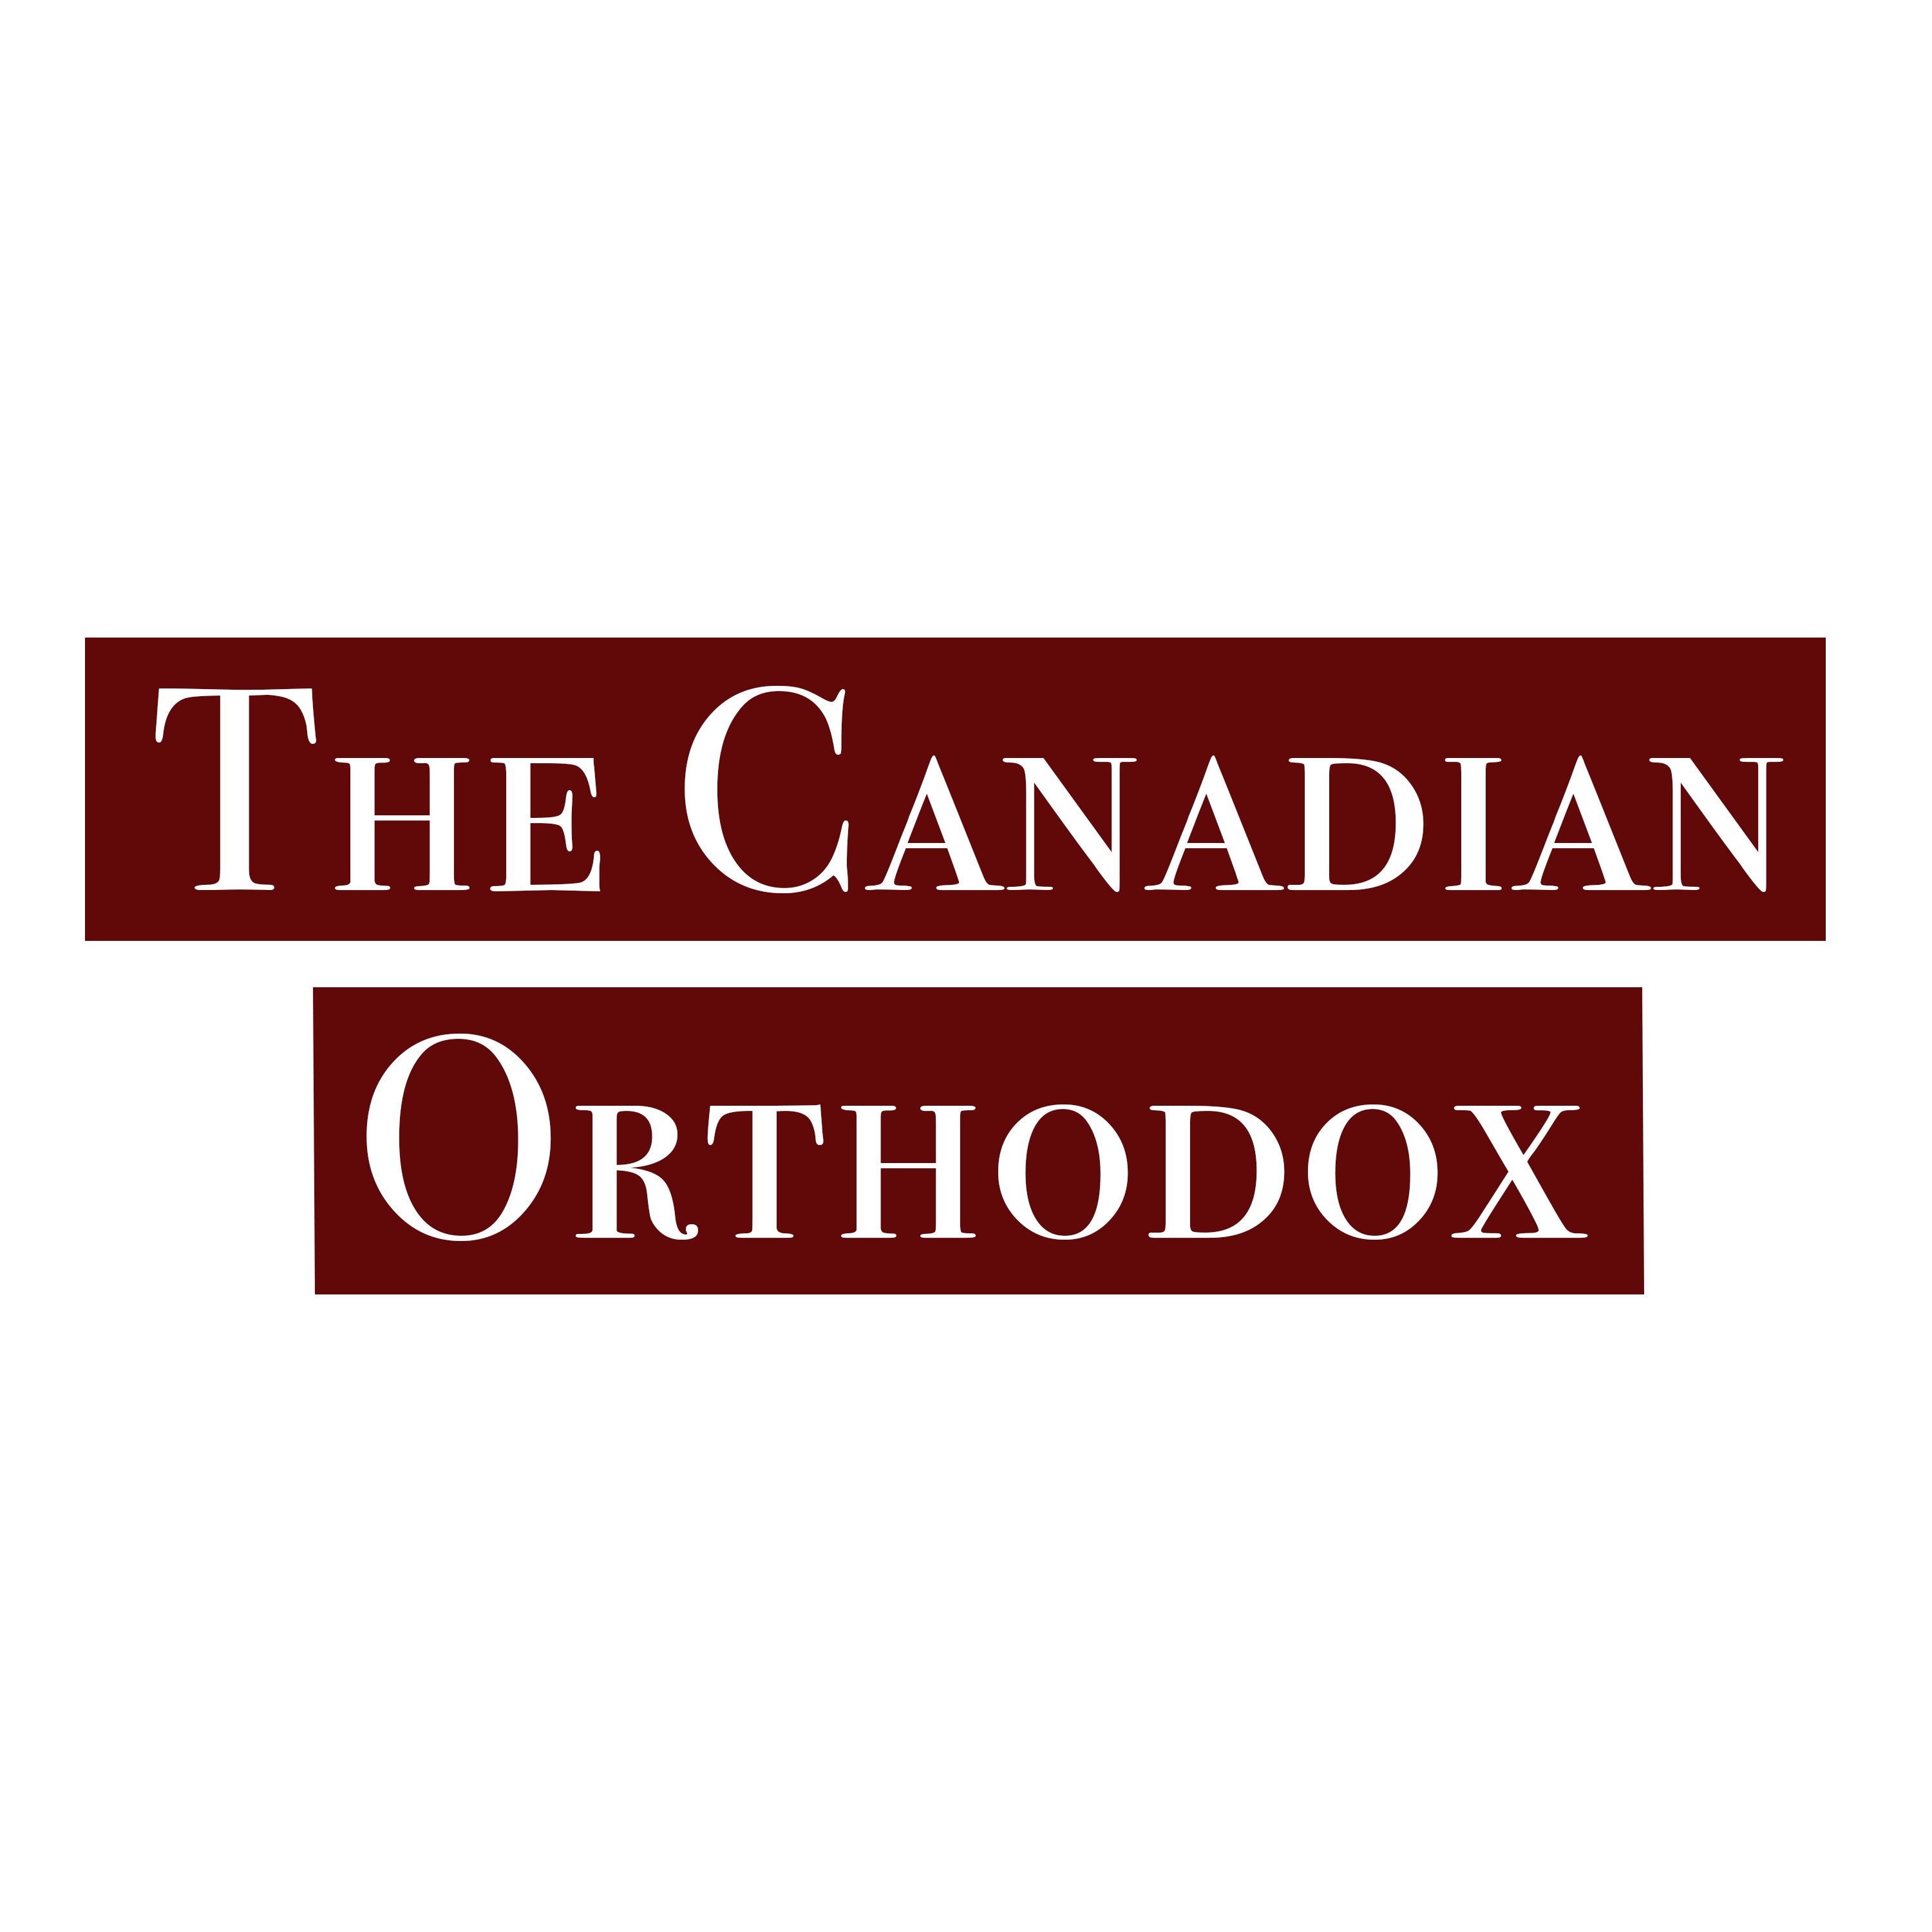 The Canadian Orthodox